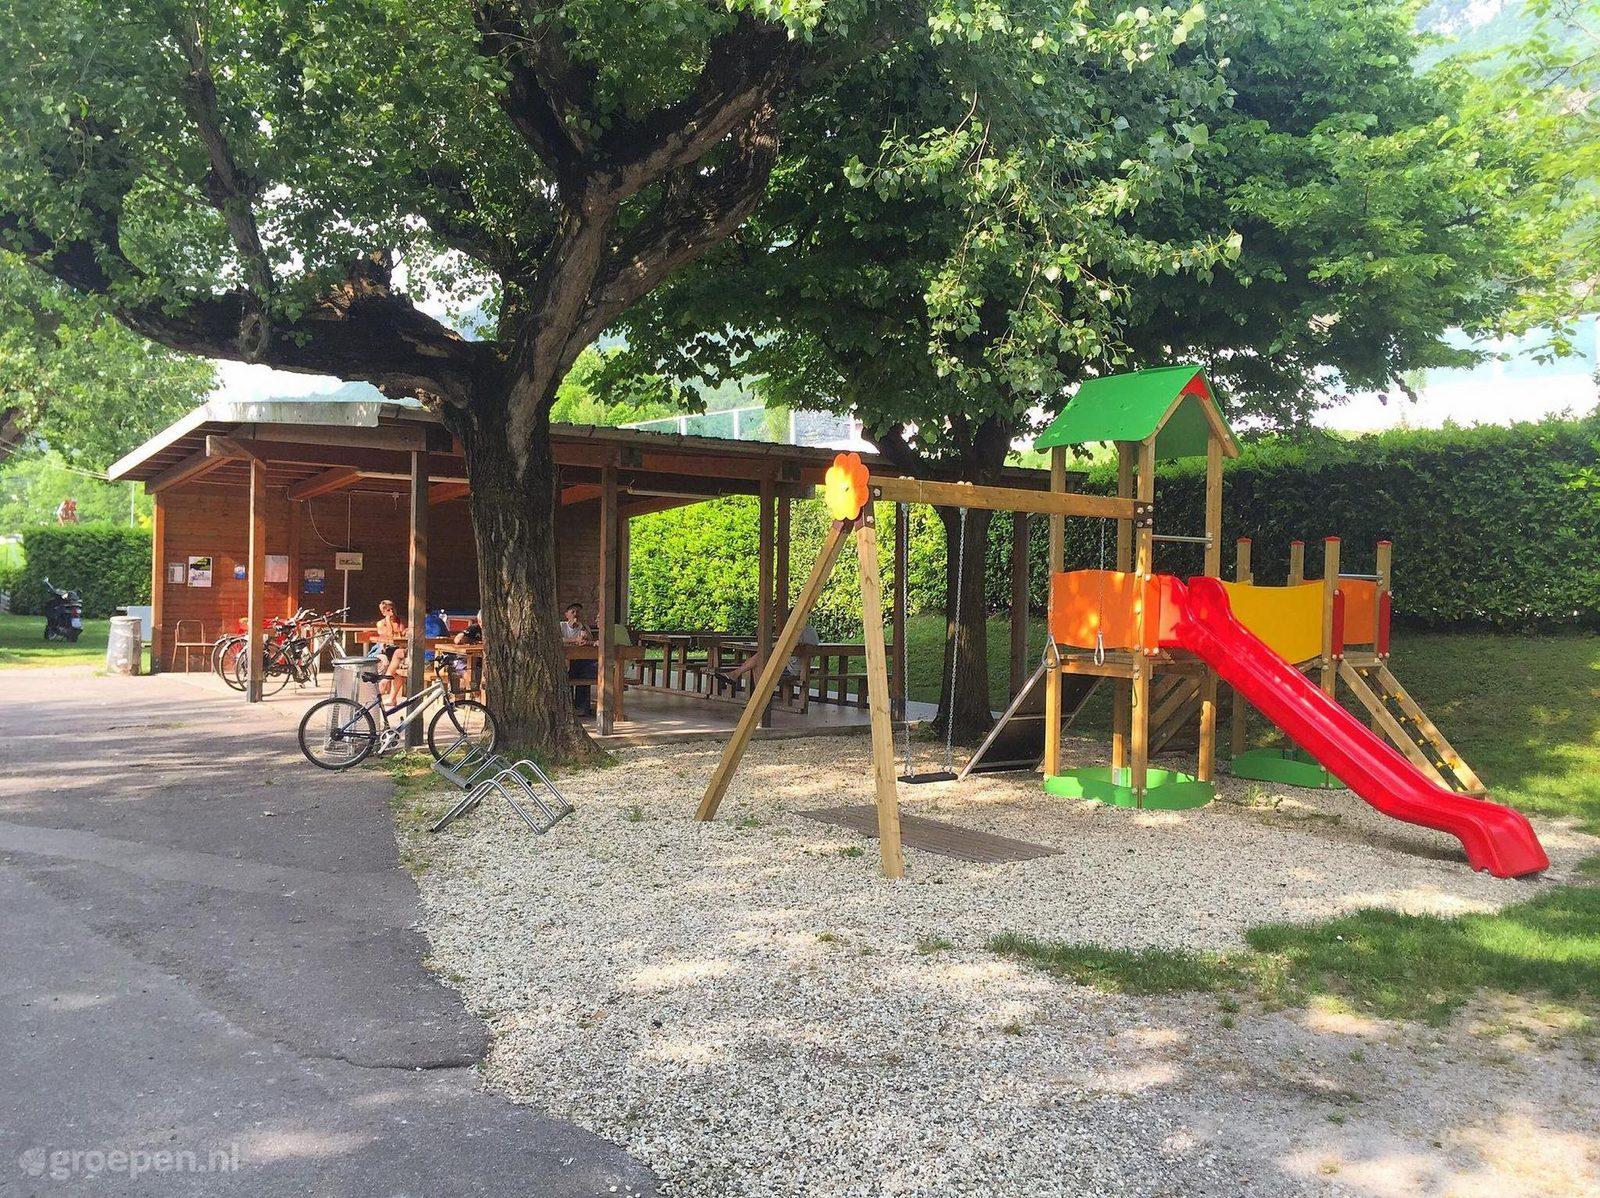 Group accommodation Lecco